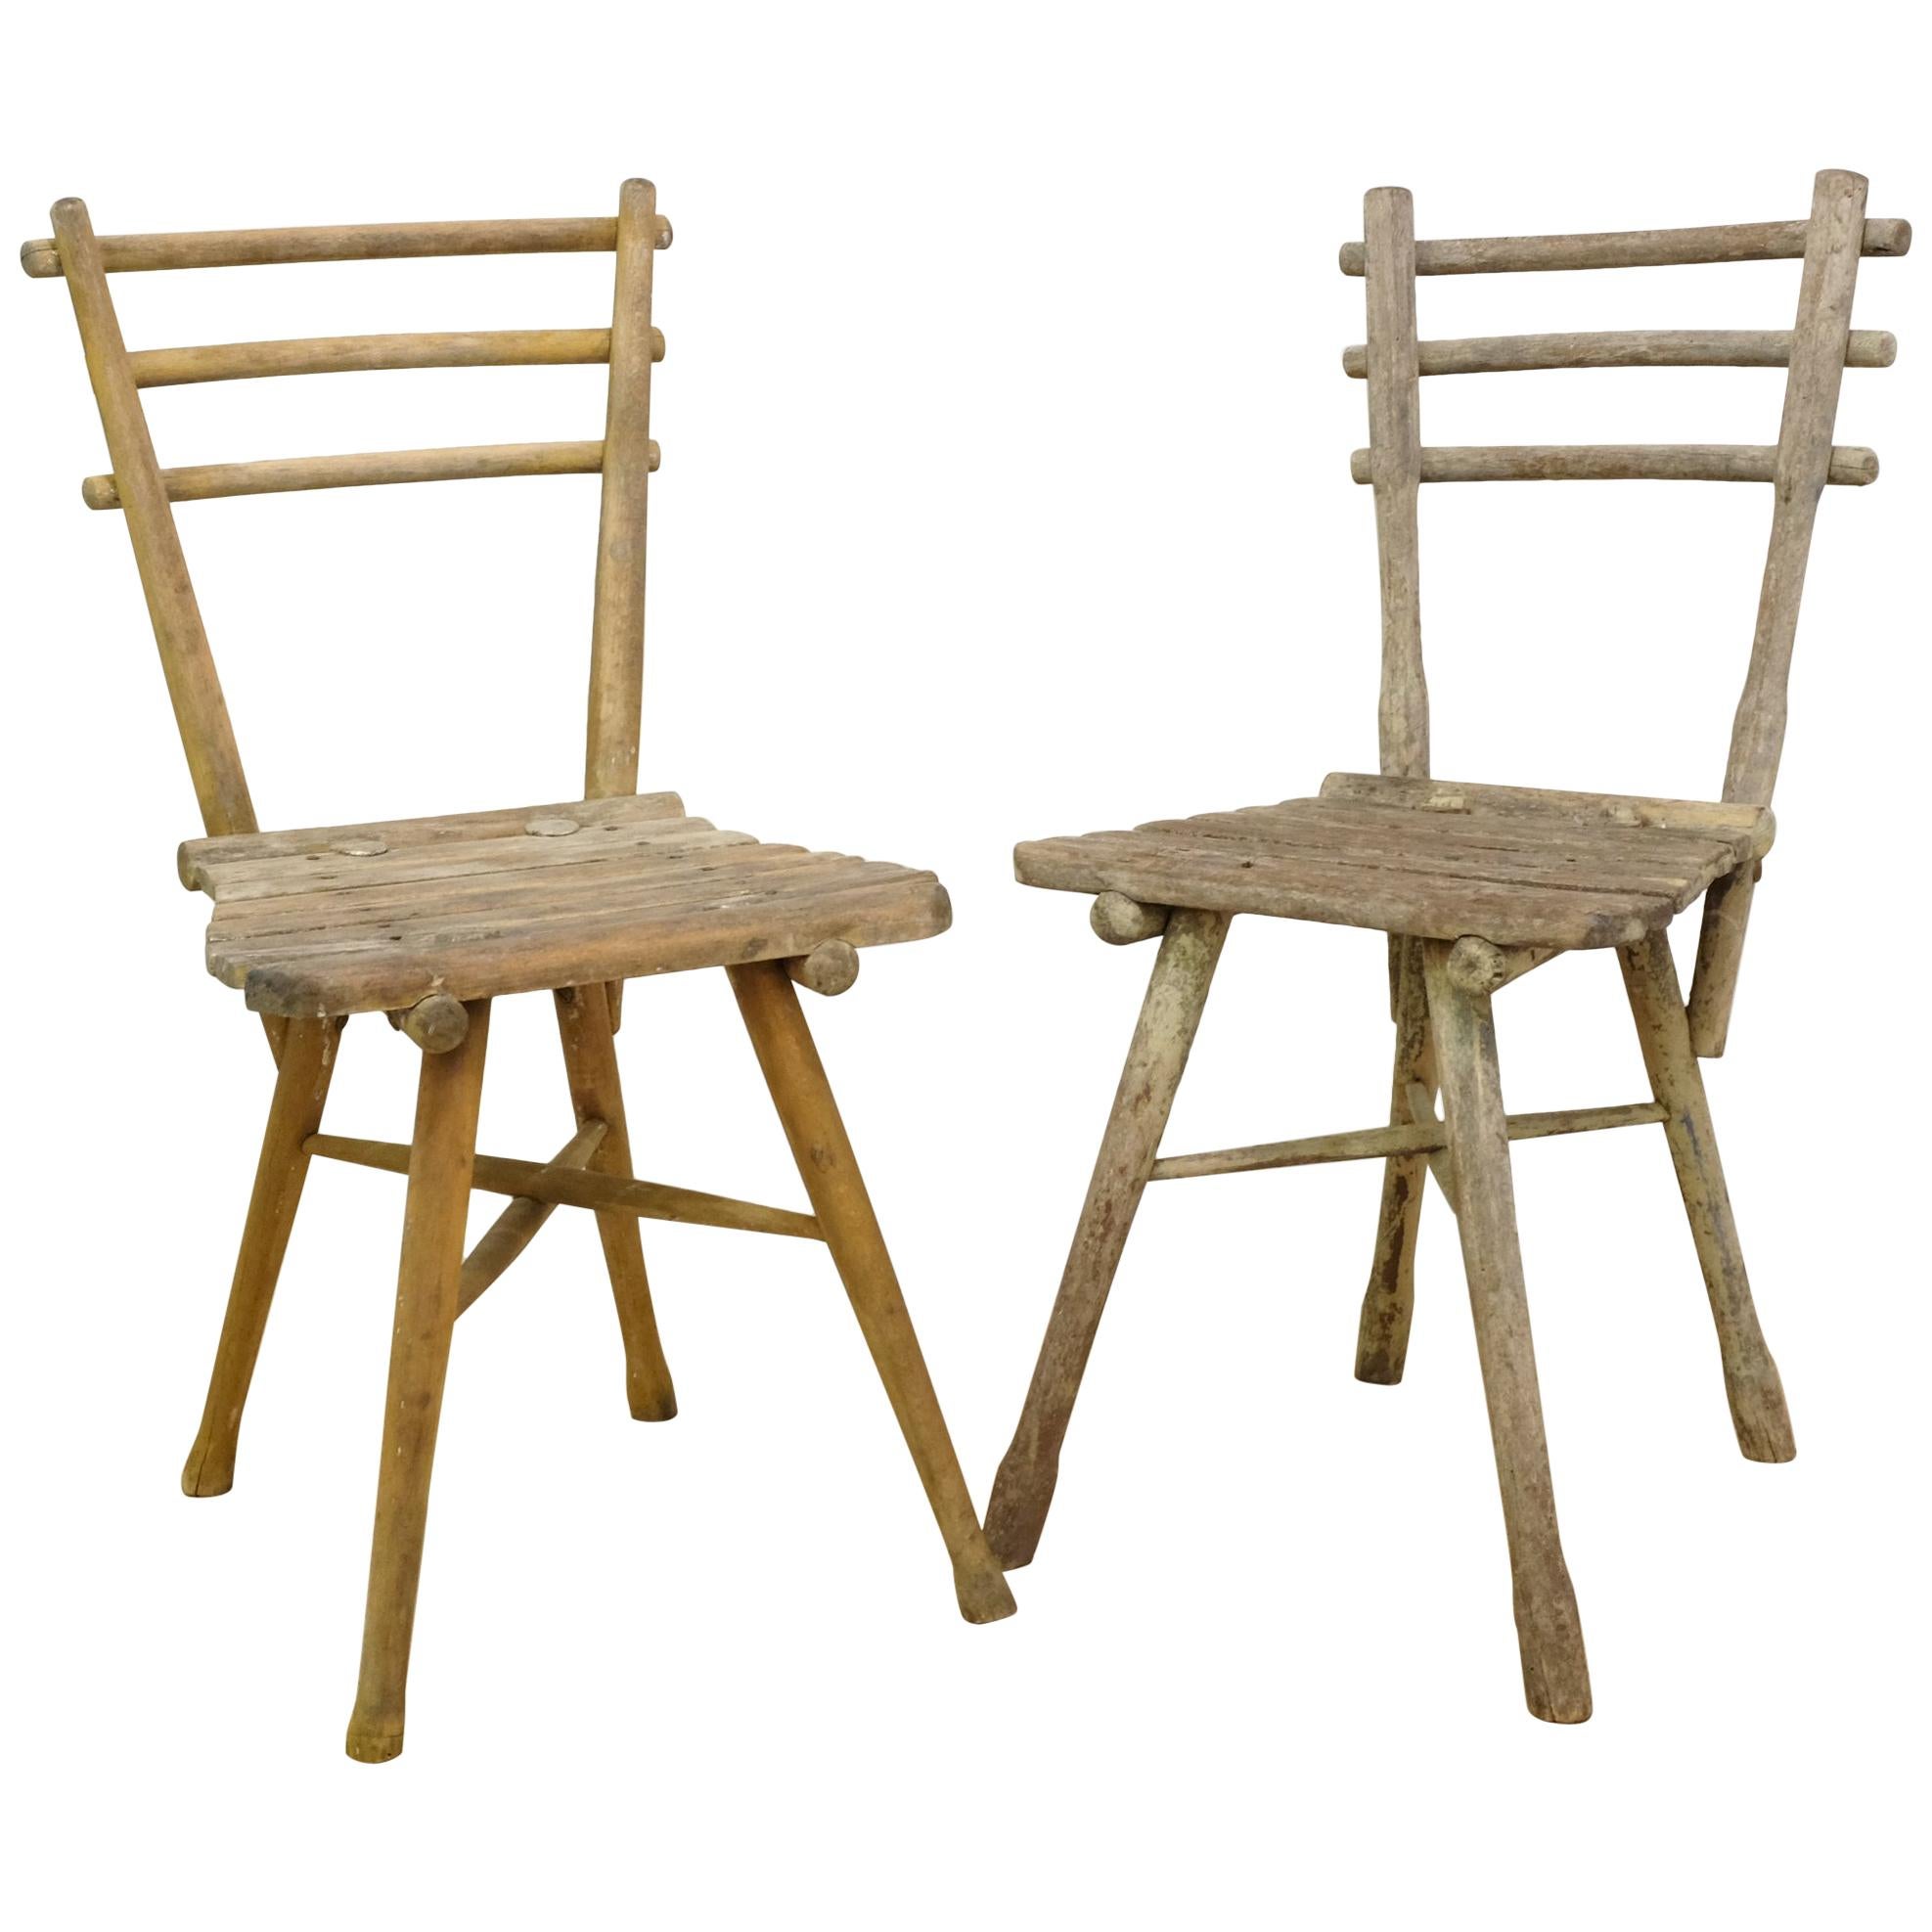 French Rustic Early 20th Century Handcrafted Chairs, Near Pair with Patina